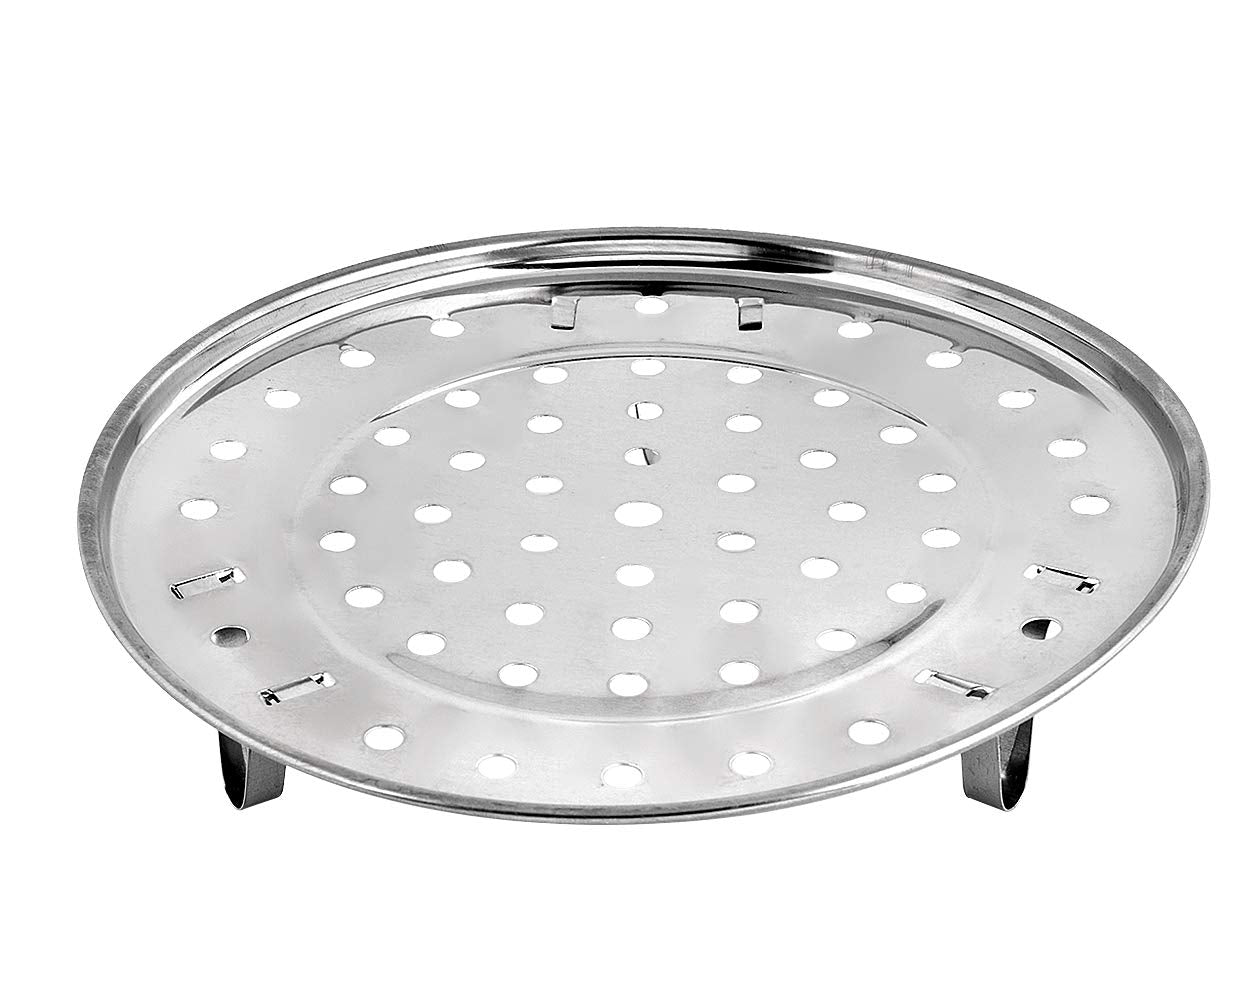 Ace Select Steam Tray Round 8.5 Inches Steamer Rack with Removable Legs - Stainless Steel Chinese Steaming Rack for Instant Pot Pressure Cooker -Instant Pot Accessories Multi-functional Steamer Basket